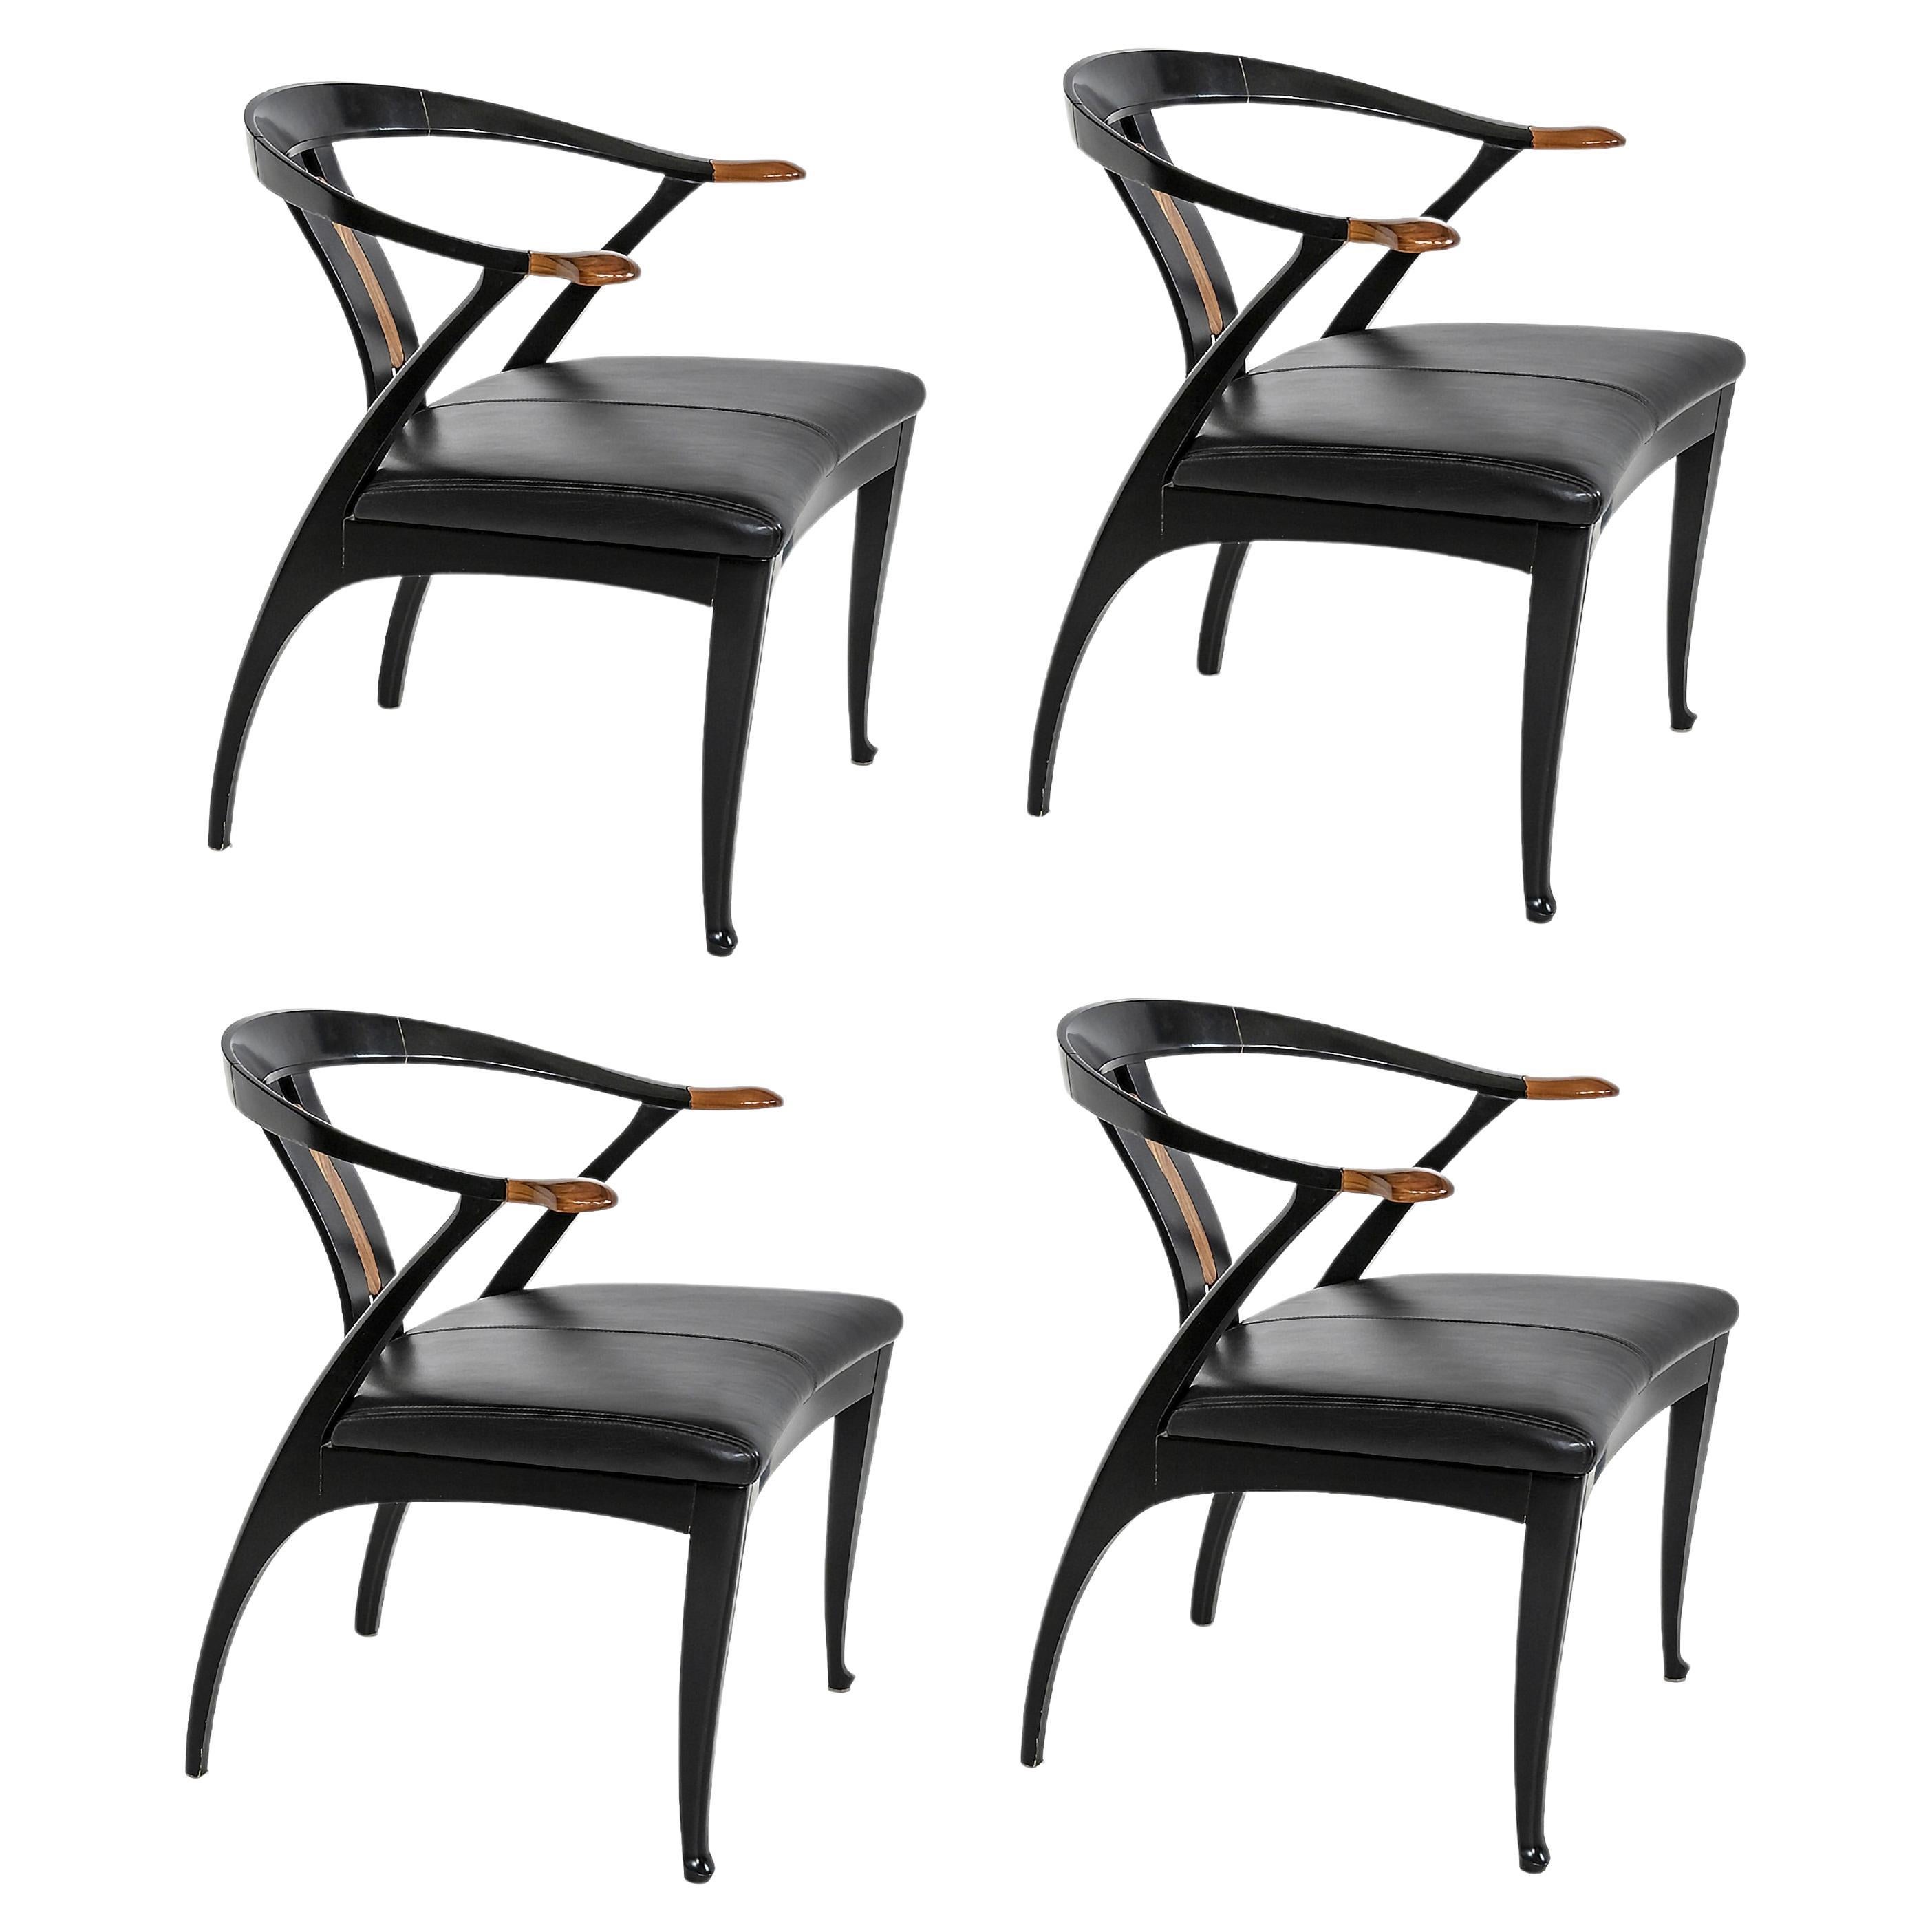 Set of 4 pcs. Italian Mid-century Giorgetti Dining Chairs from 1980's